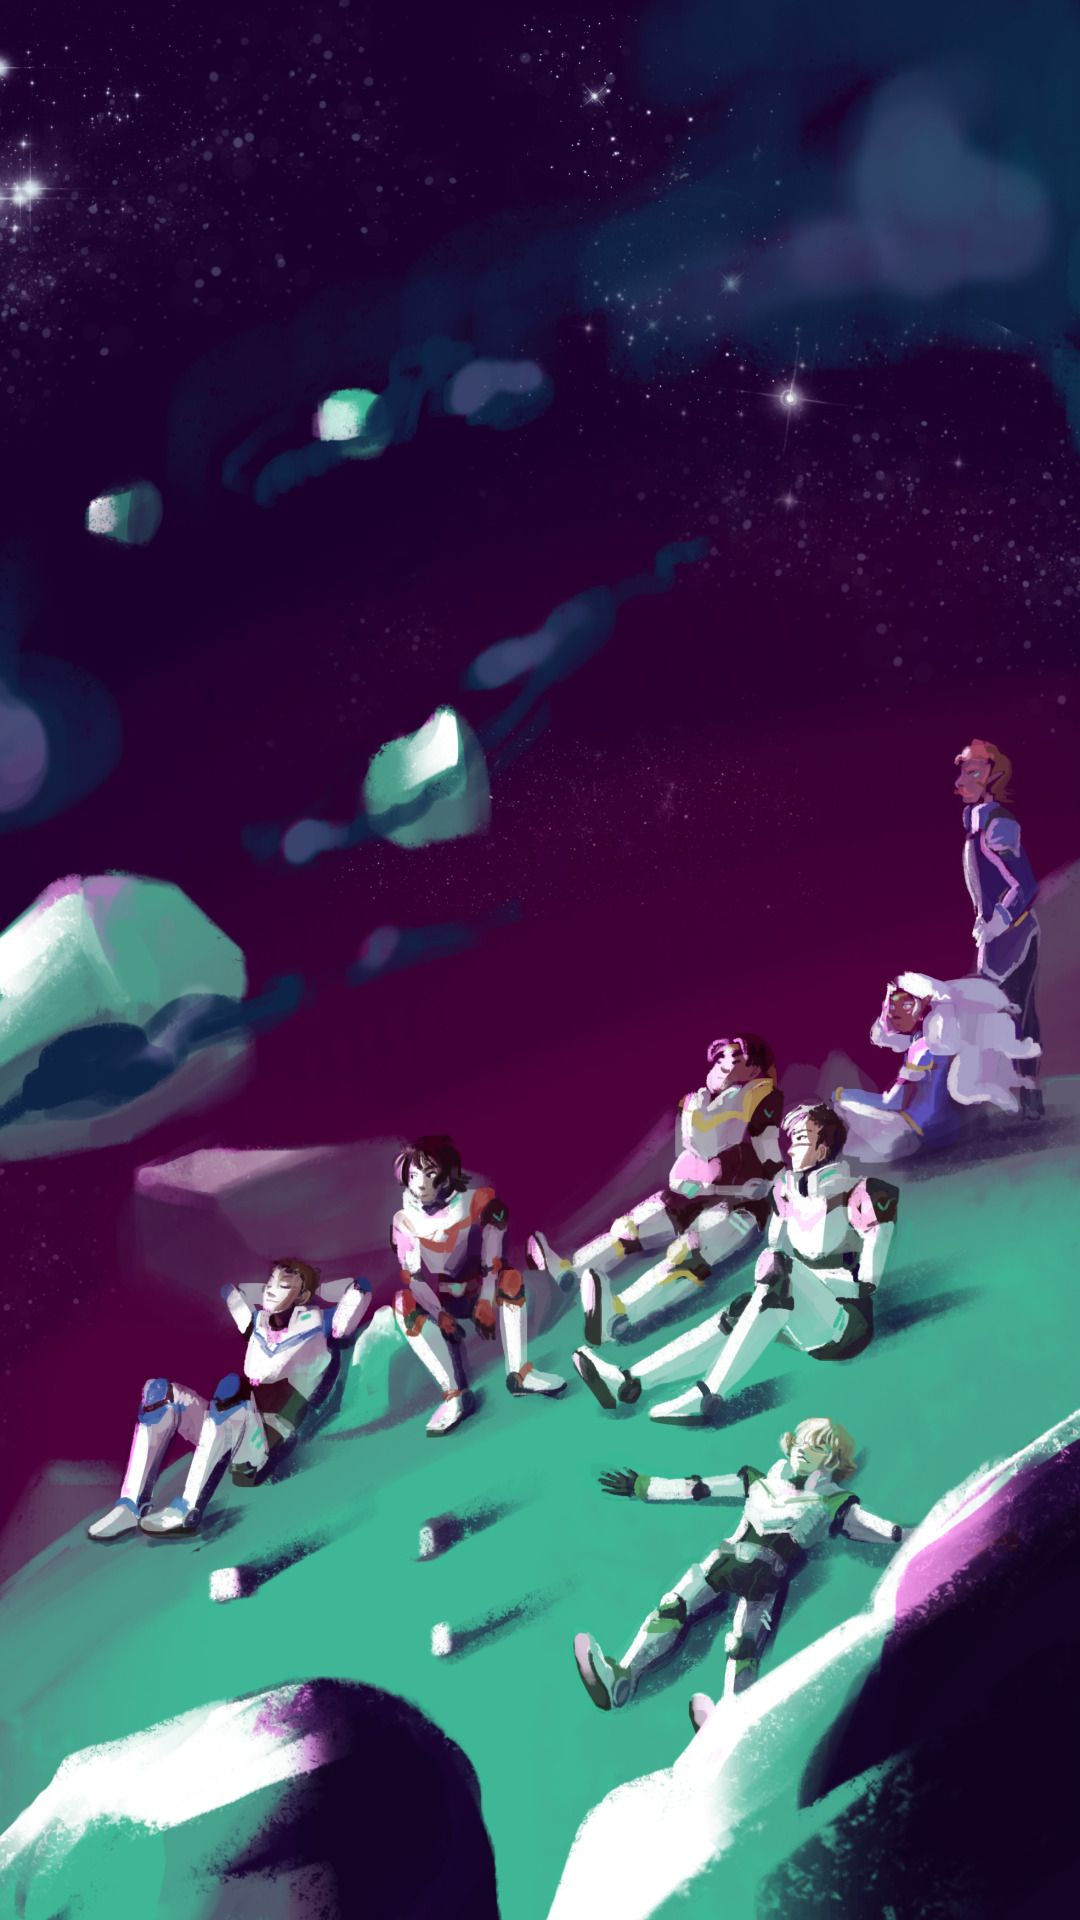 1080x1920 Voltron team relaxing for once in some small planet. (made this as a phone wallpaper ) | Voltron, Voltron fanart, Voltron legendary defender